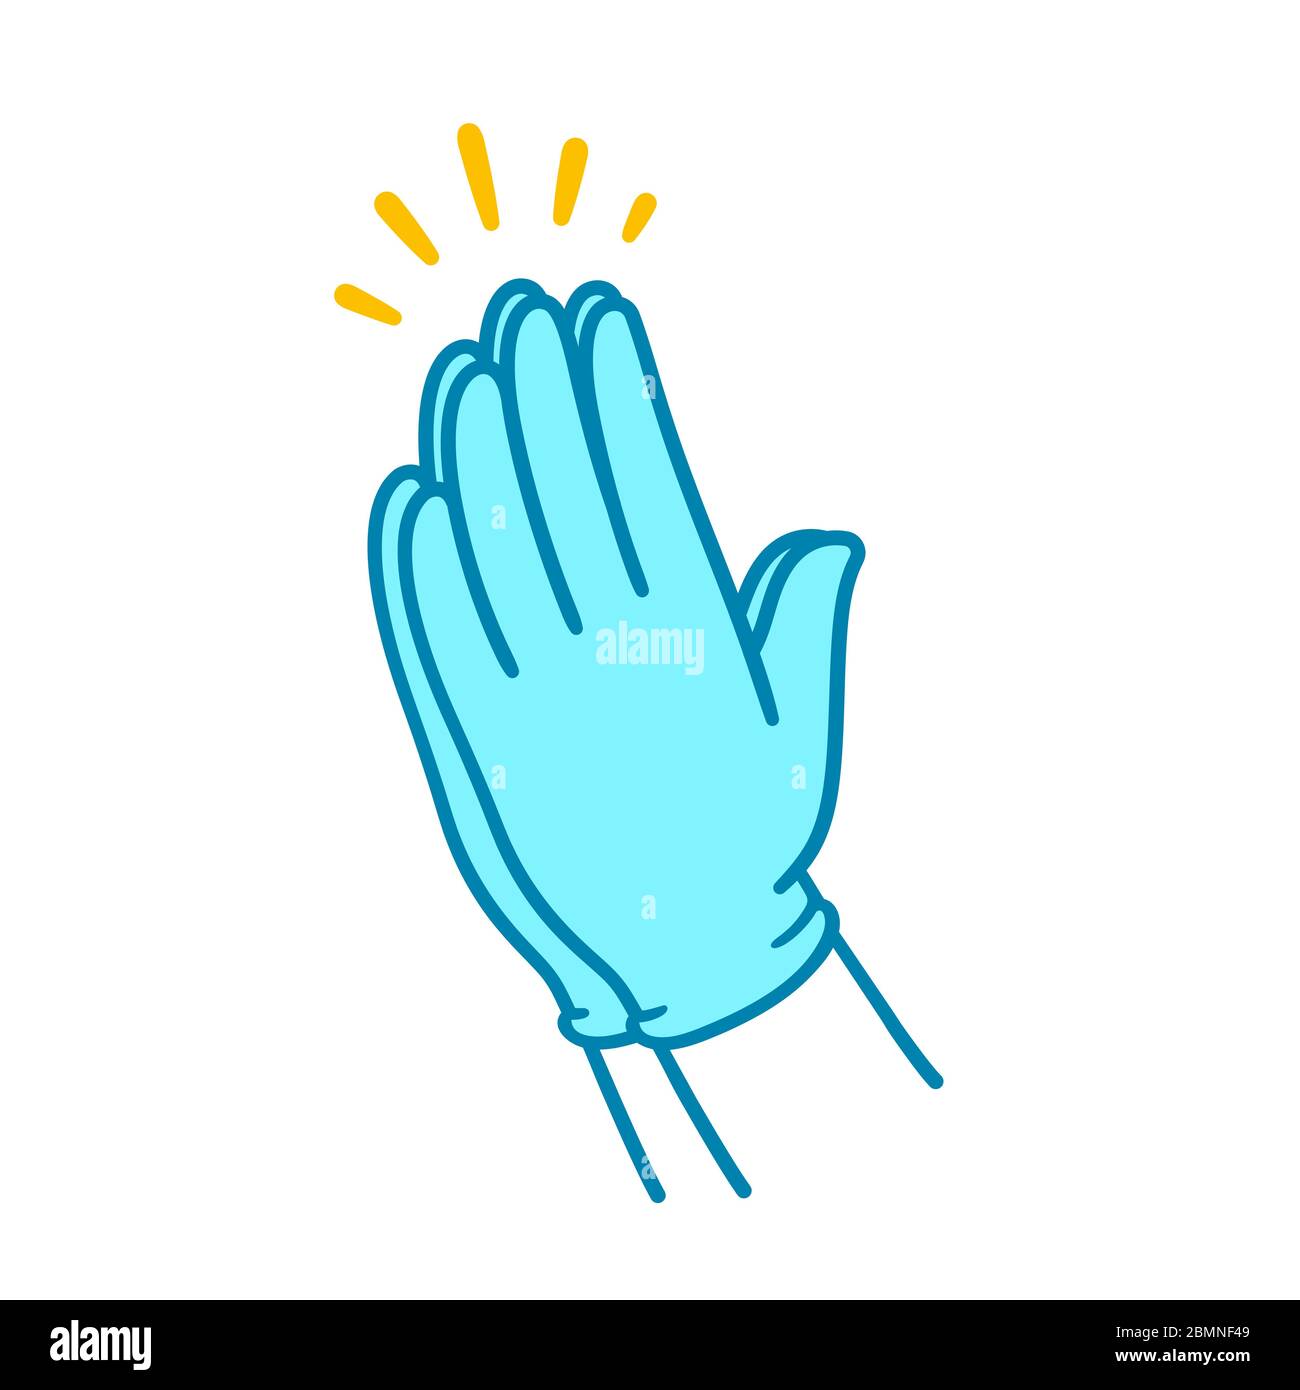 Praying hands in blue surgical latex gloves, simple illustration. Hands folded in Christian prayer. Health care worker, medical profession. Stock Vector